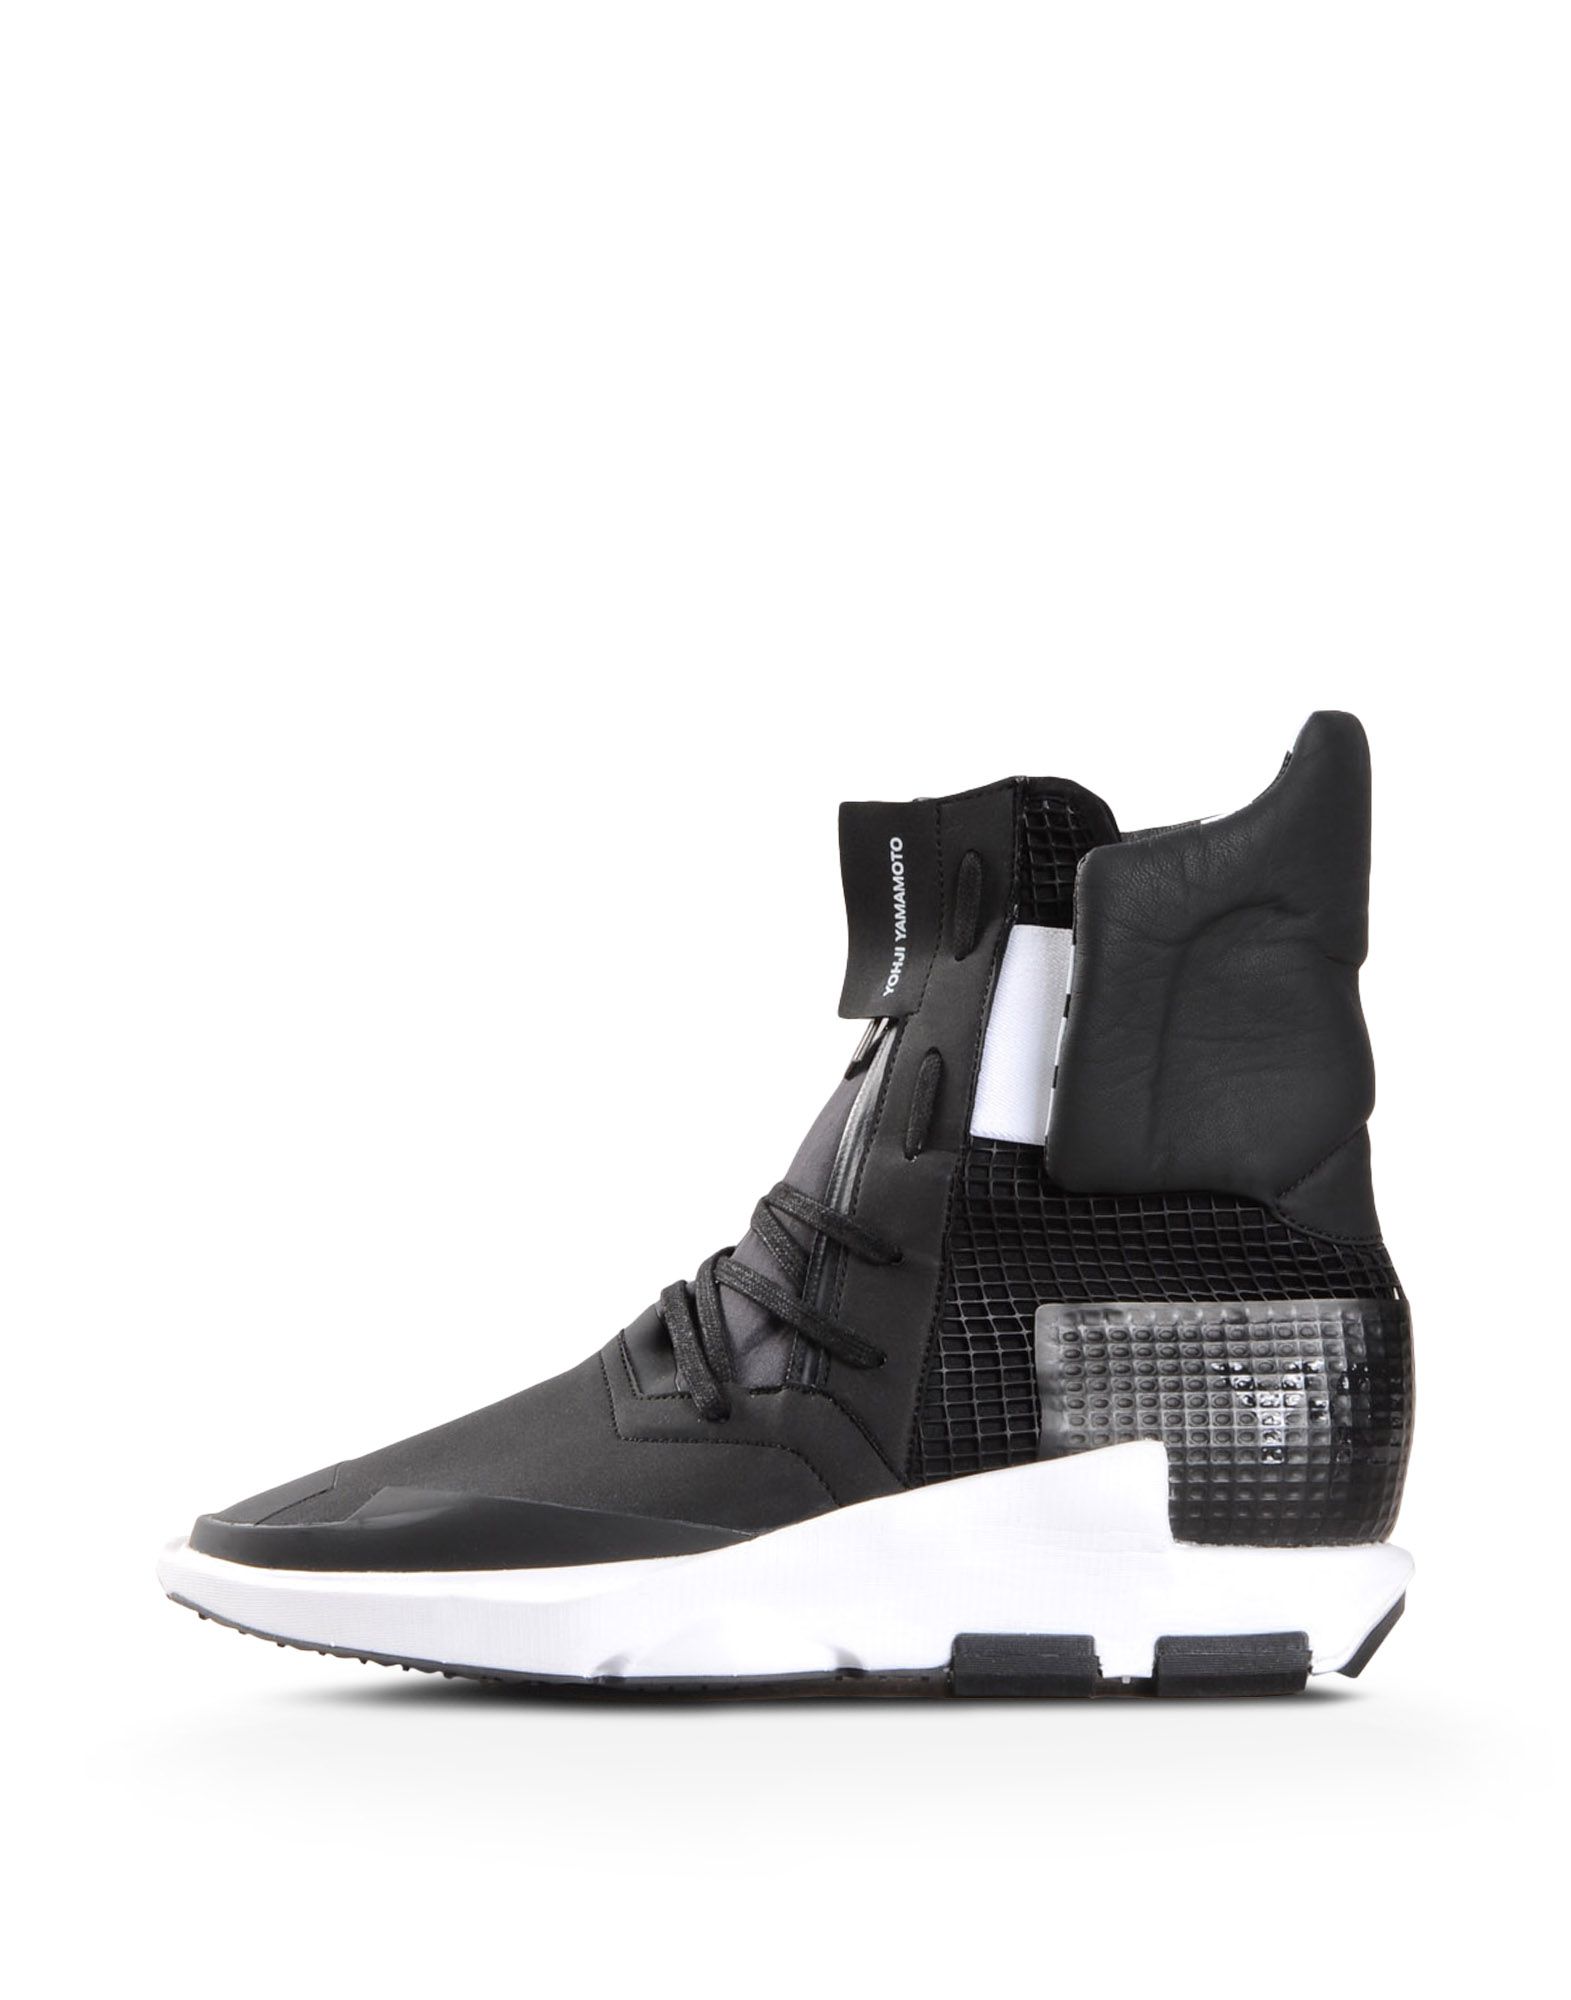 y3 high tops Online Shopping for Women 